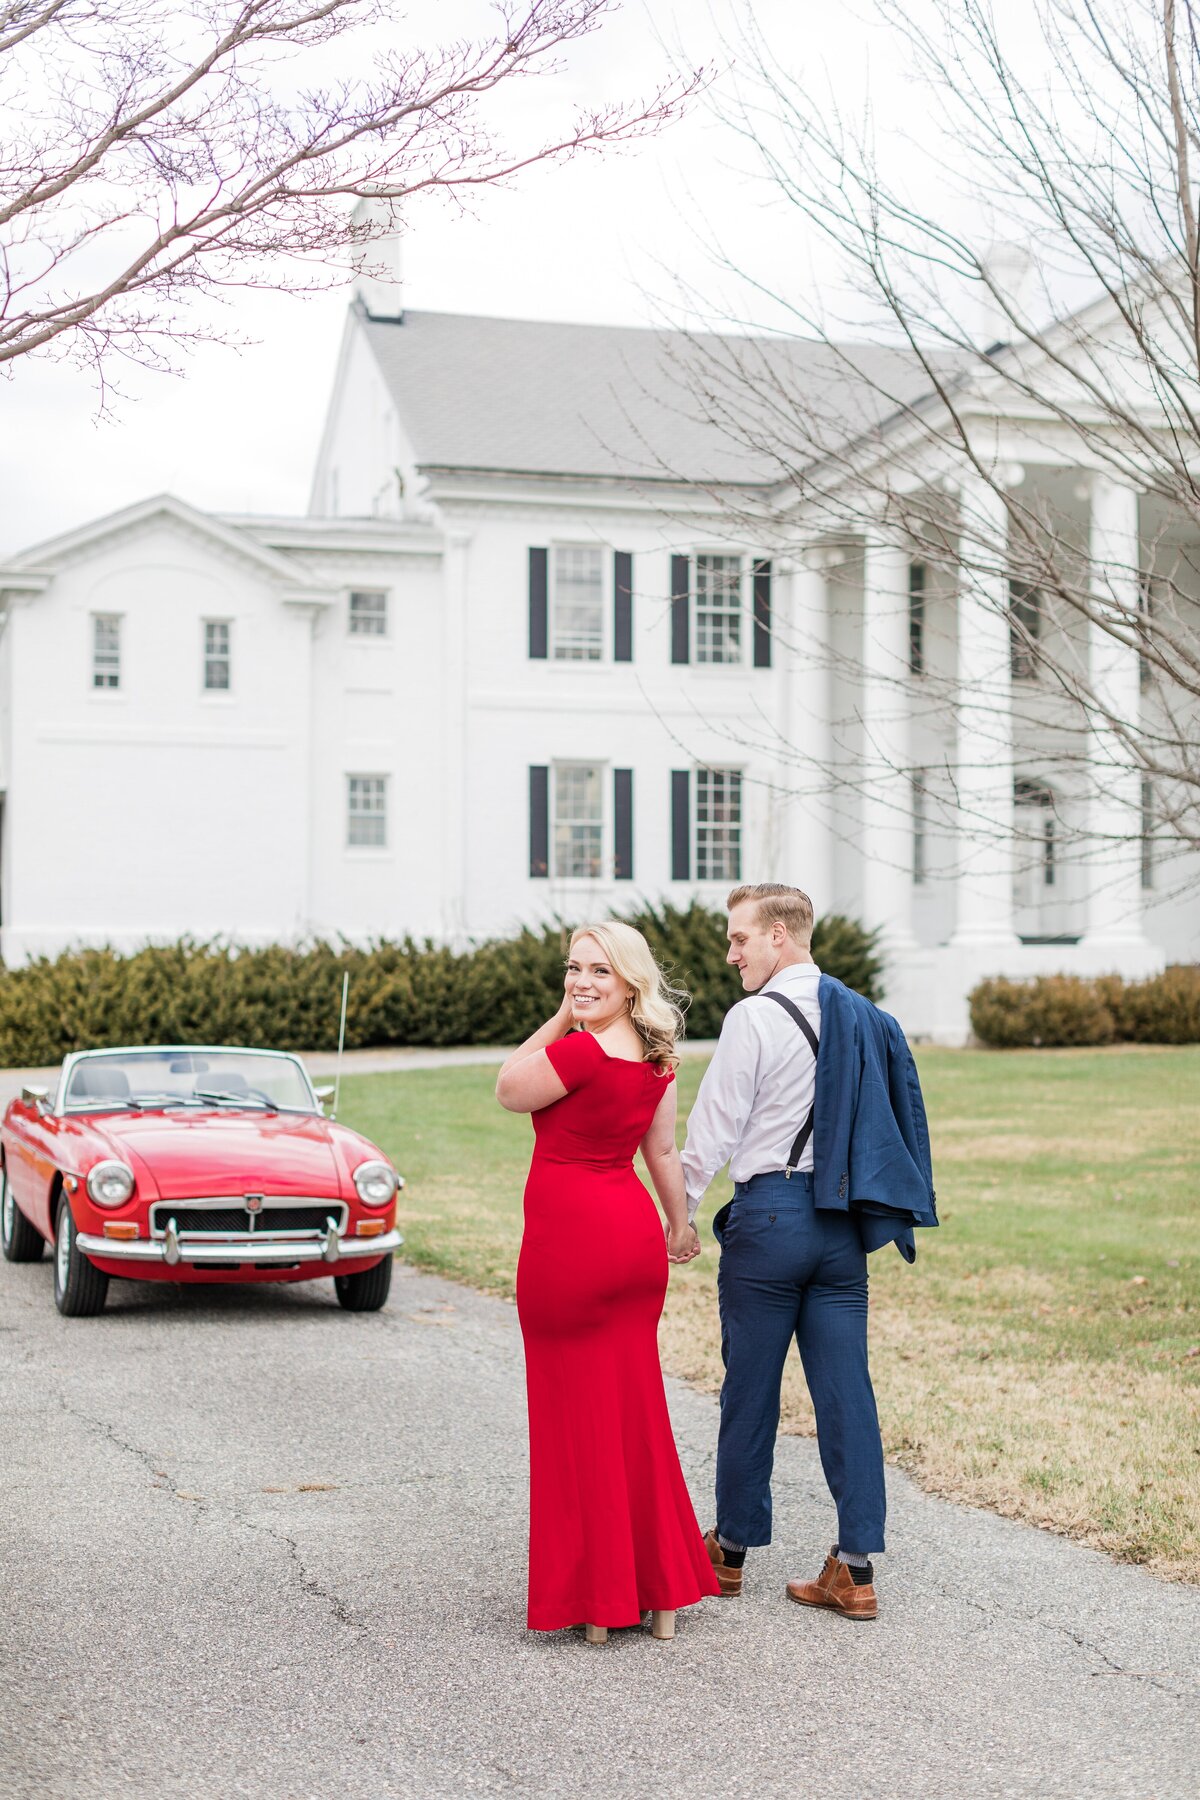 Vintage-Car-Engagement-Photos-DC-Maryland-Silver-Orchard-Creative_0030